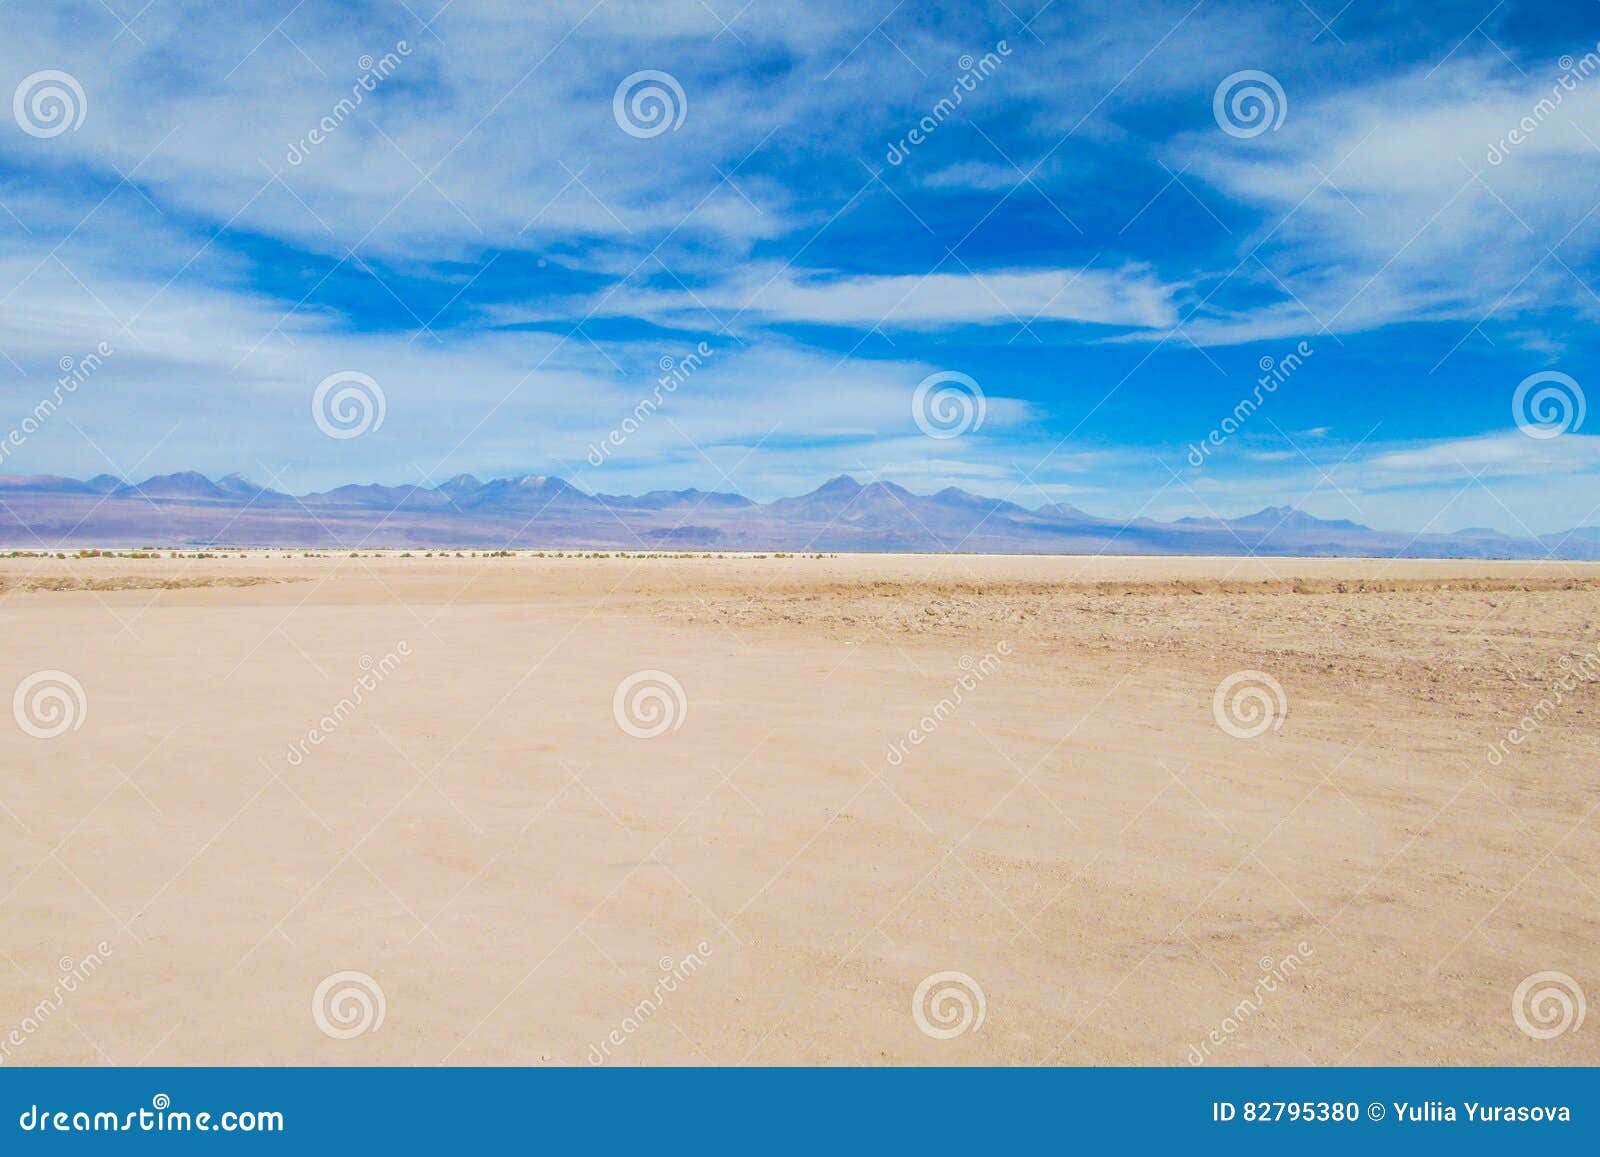 18 010 Flat Land Photos Free Royalty Free Stock Photos From Dreamstime